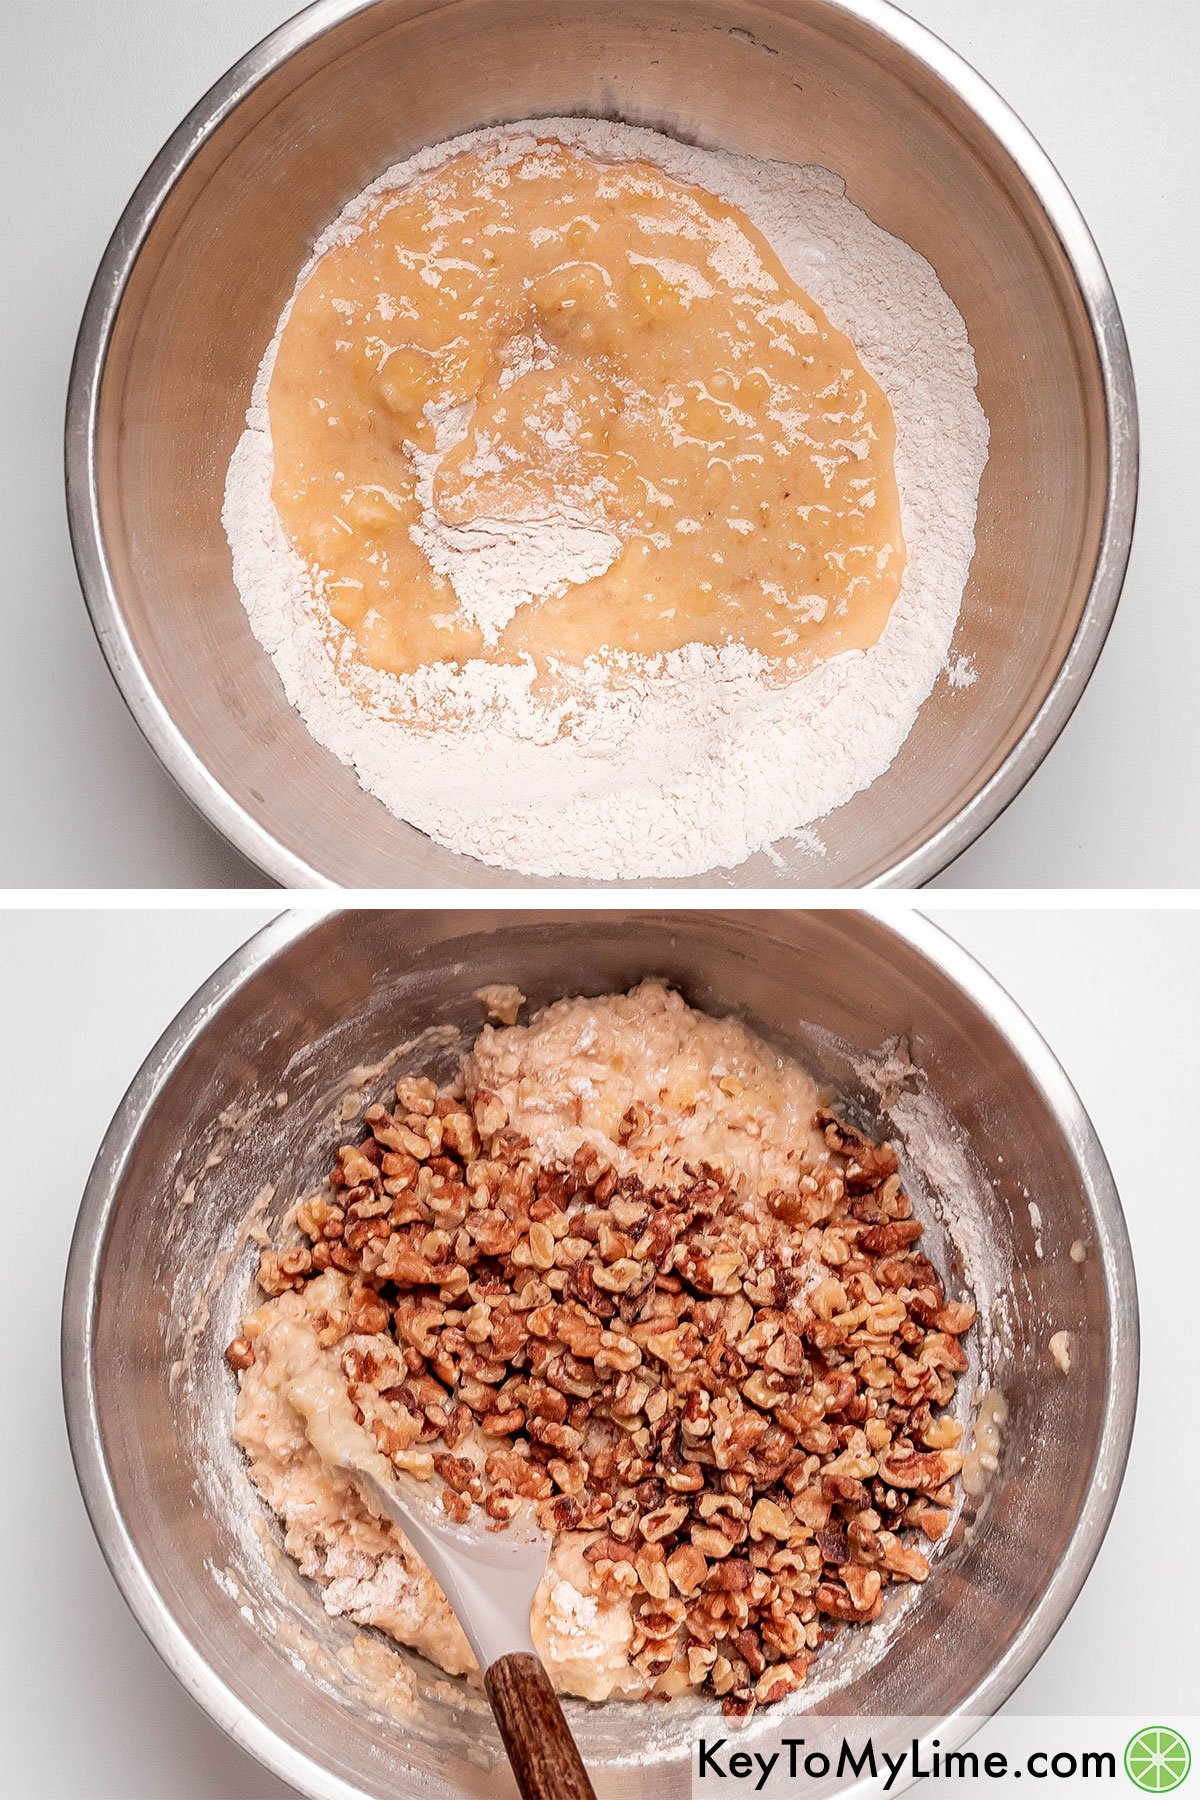 Adding the wet banana mixture to the dry flour ingredients in a large mixing bowl and mixing until just combined then adding in walnuts.